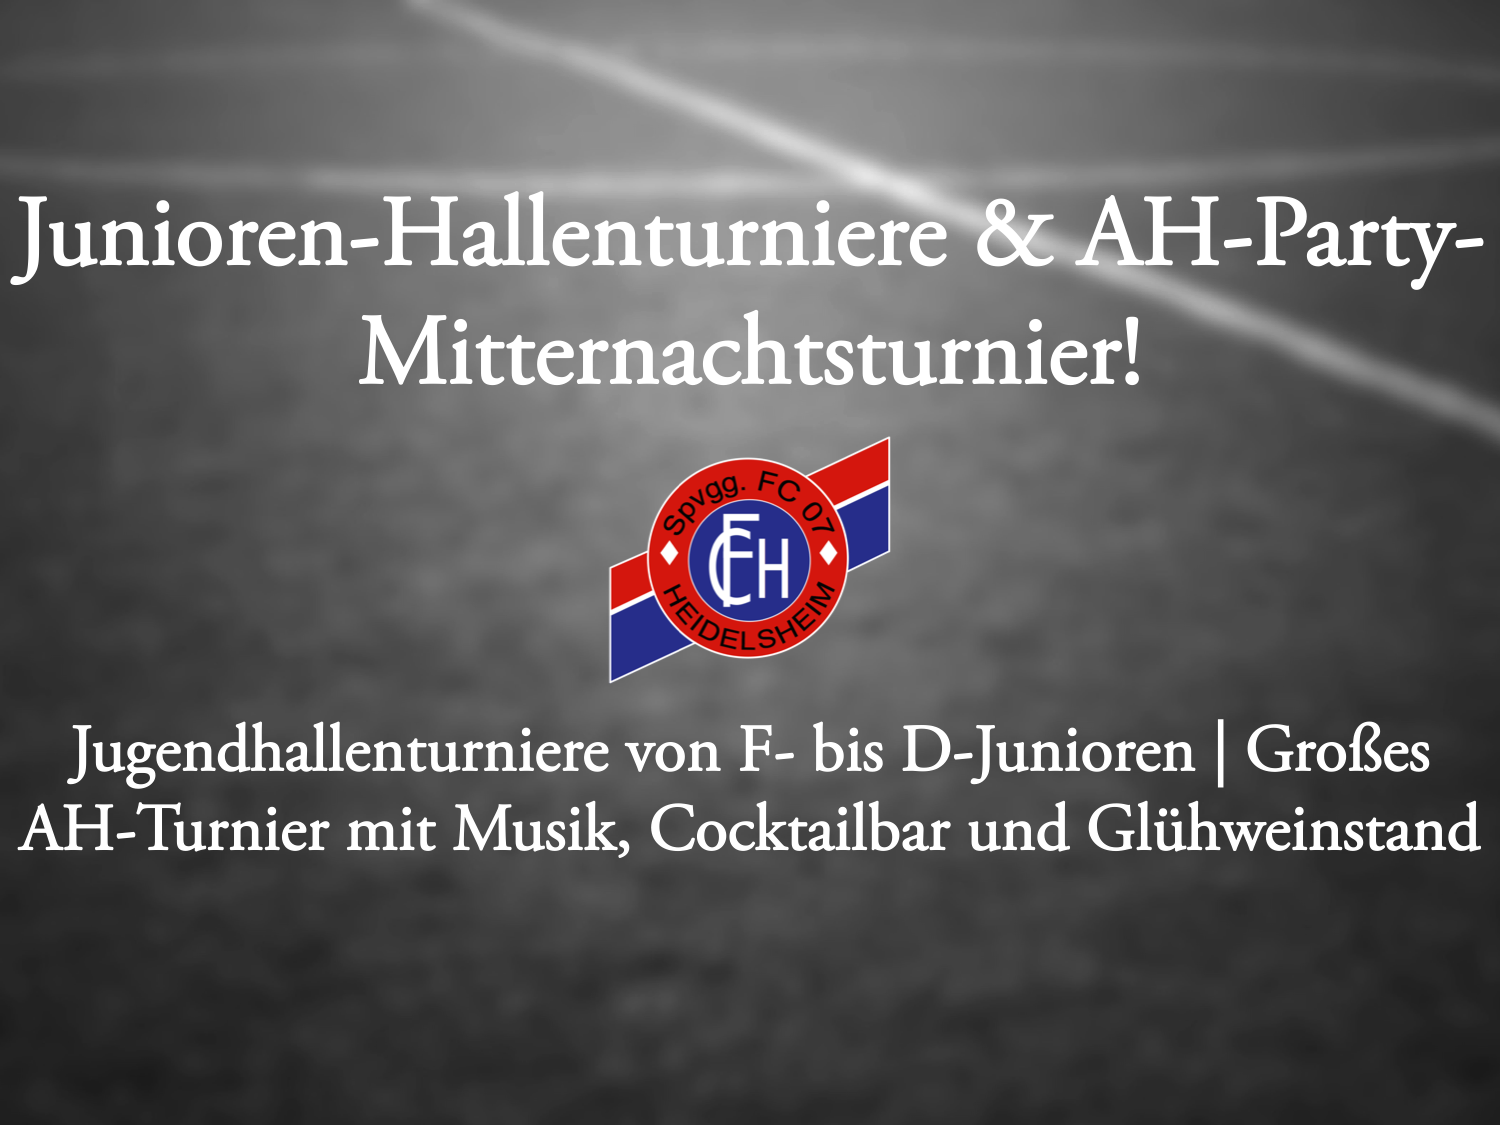 You are currently viewing Junioren-Turniere & AH-Party-Mitternachtsturnier